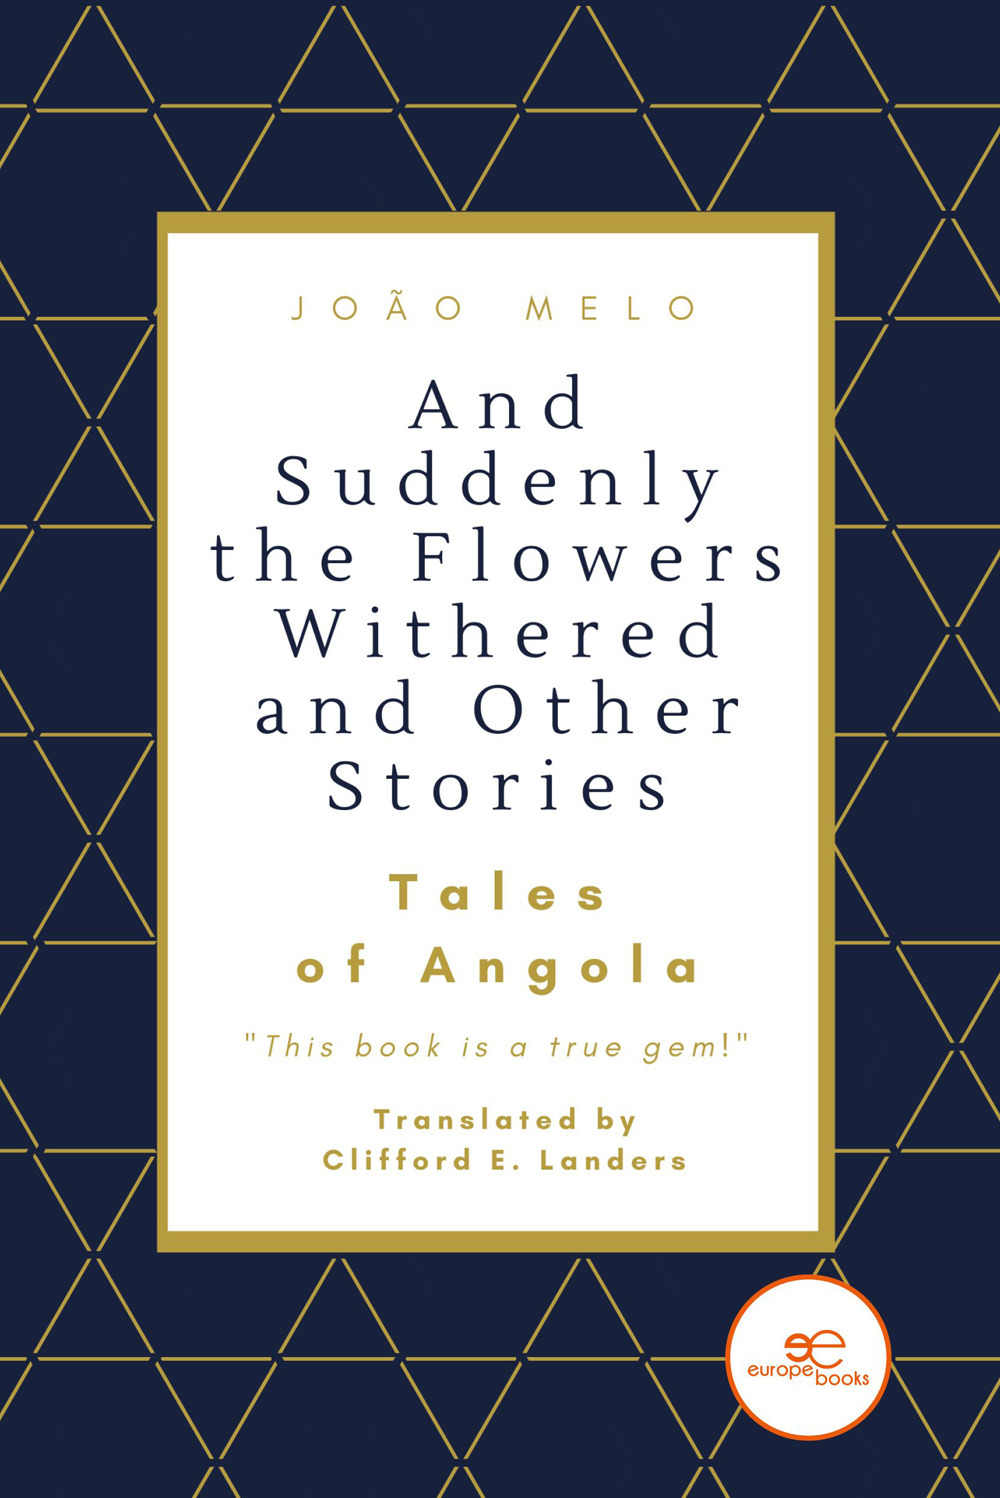 And suddenly the flowers withered and other stories. Tales of Angola